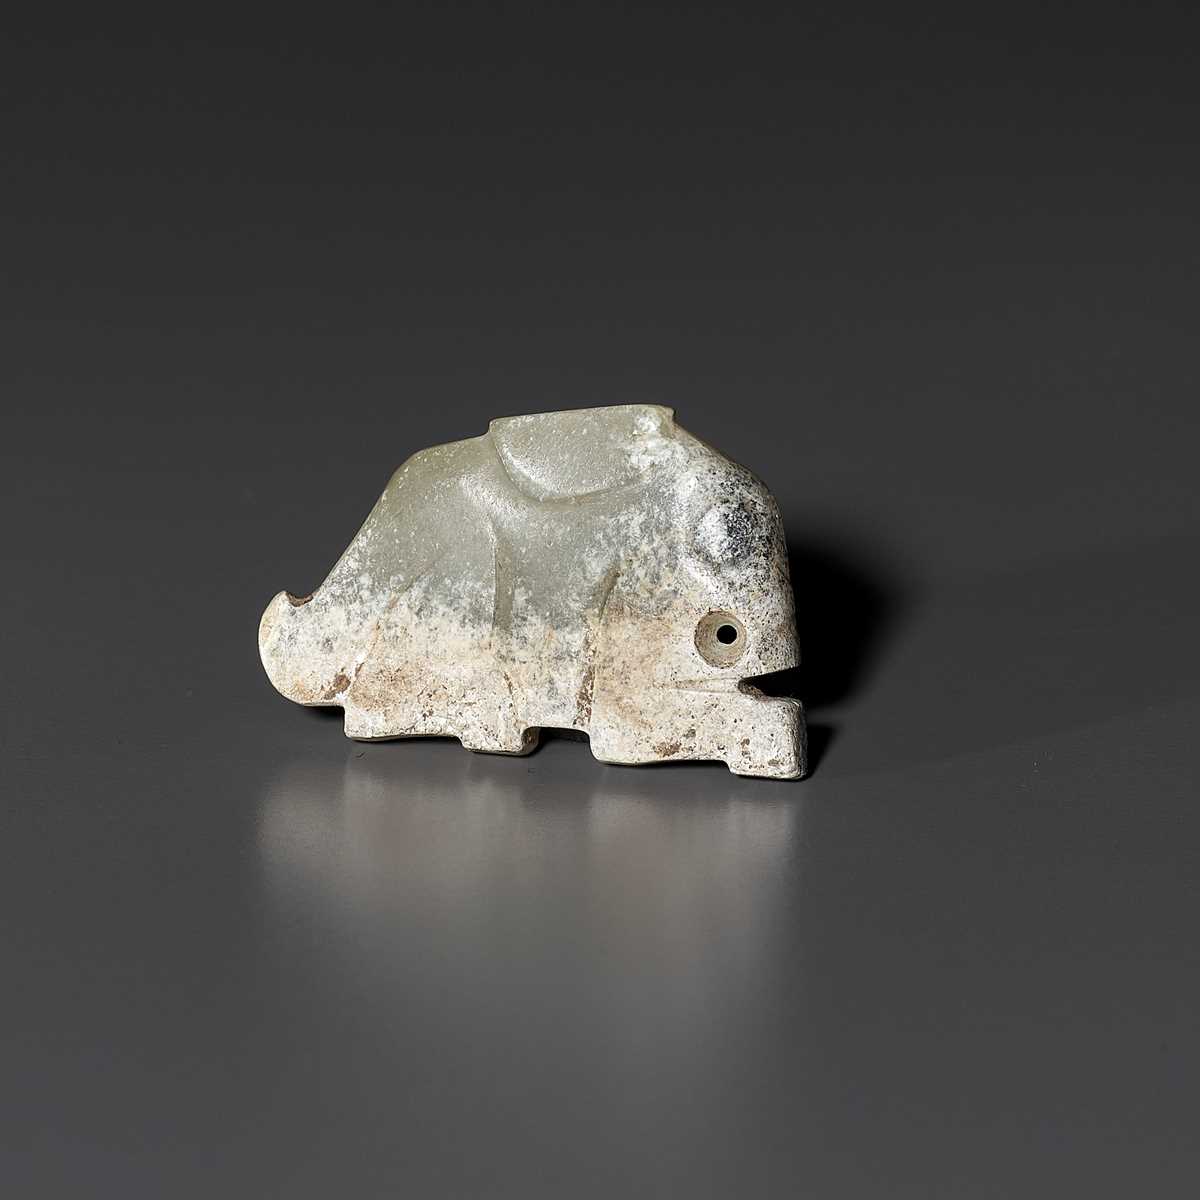 Lot 28 - A PALE CELADON JADE ‘HARE’ PENDANT, LATE SHANG TO WESTERN ZHOU DYNASTY